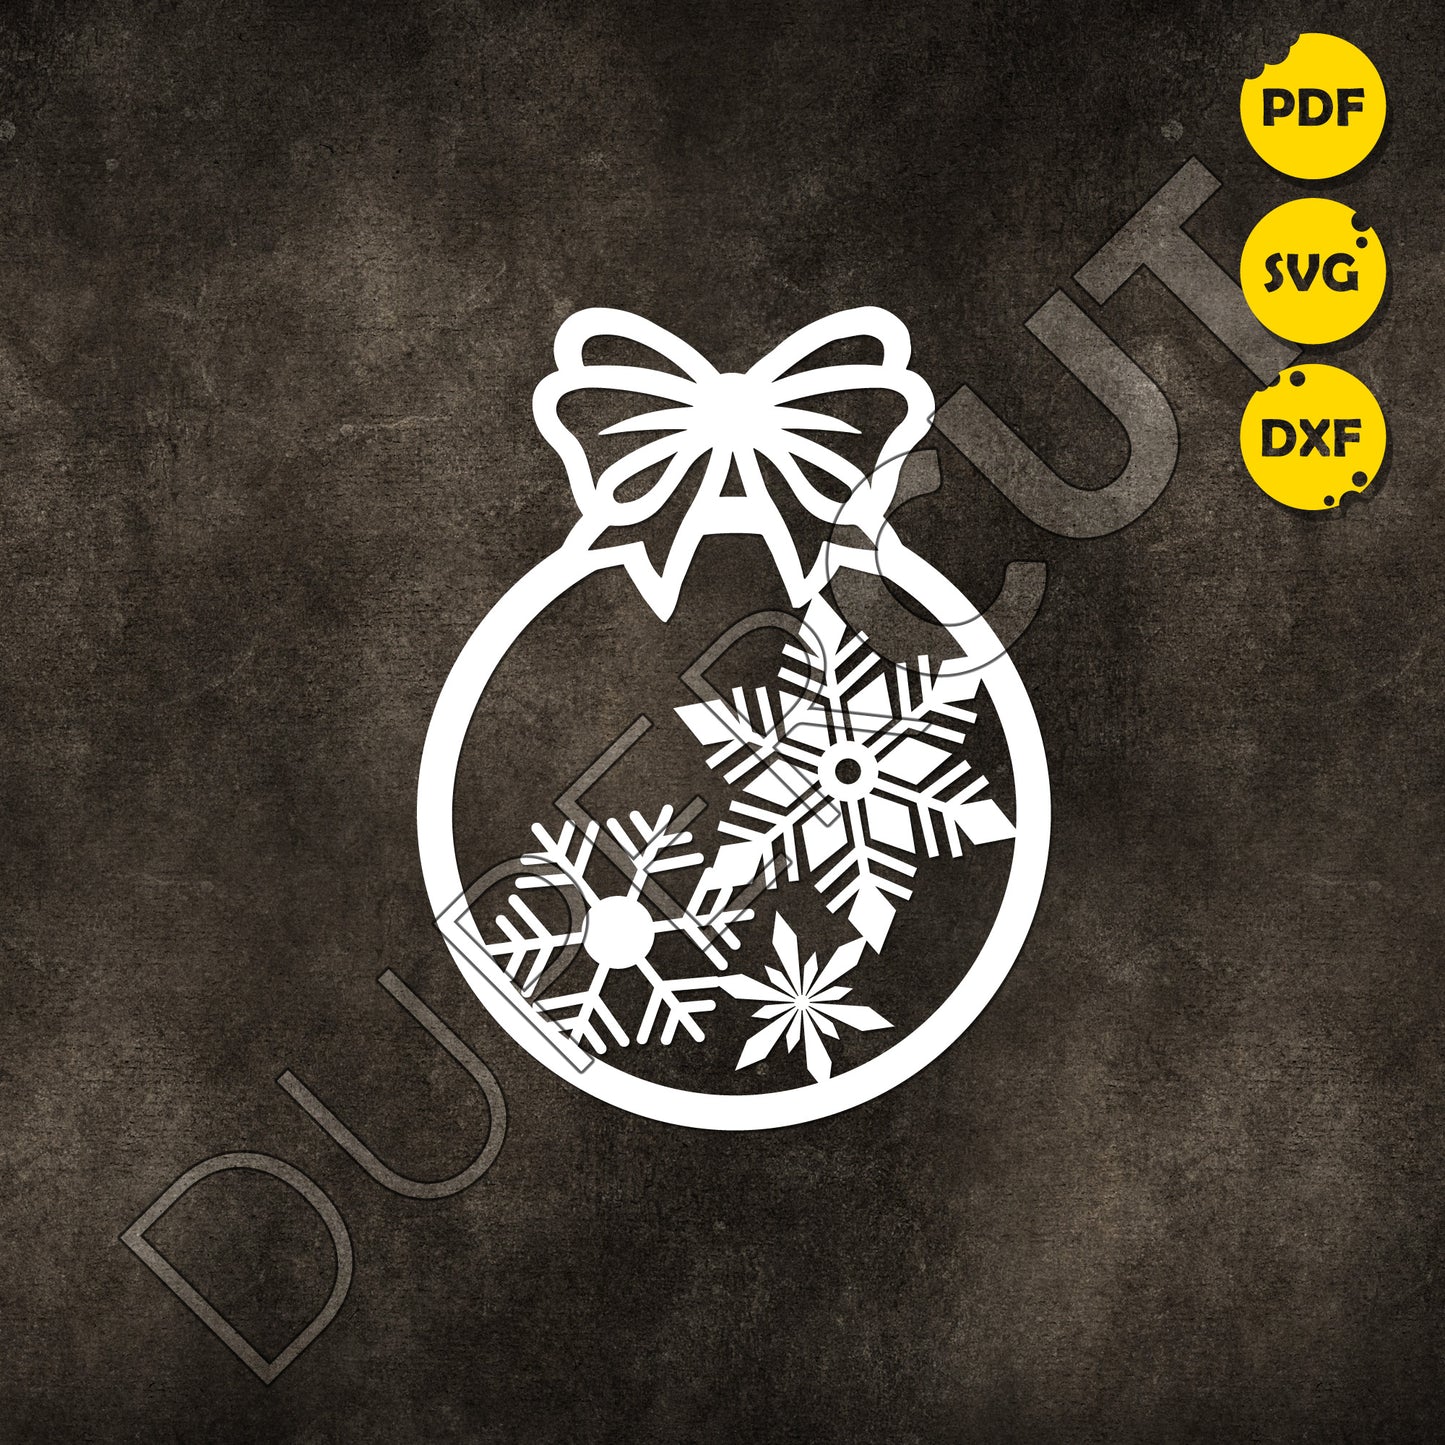 Snowflake Christmas tree ornament, simple scroll saw  template - SVG DXF PNG files for Cricut, Glowforge, Silhouette Cameo, CNC Machines